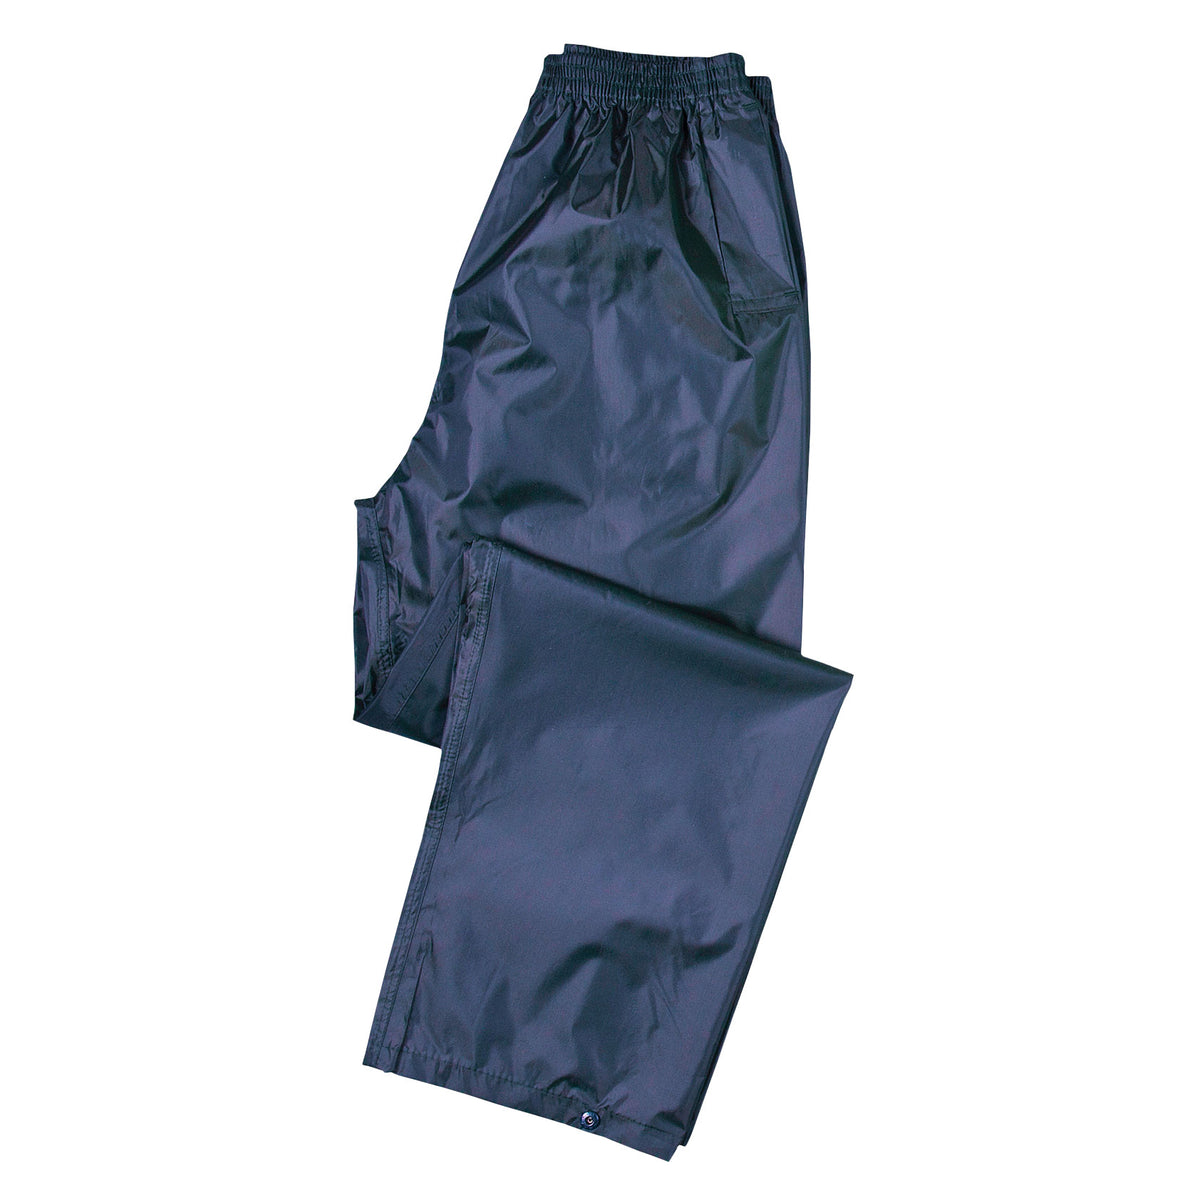 Overtrousers - peterdrew.com
 - 3